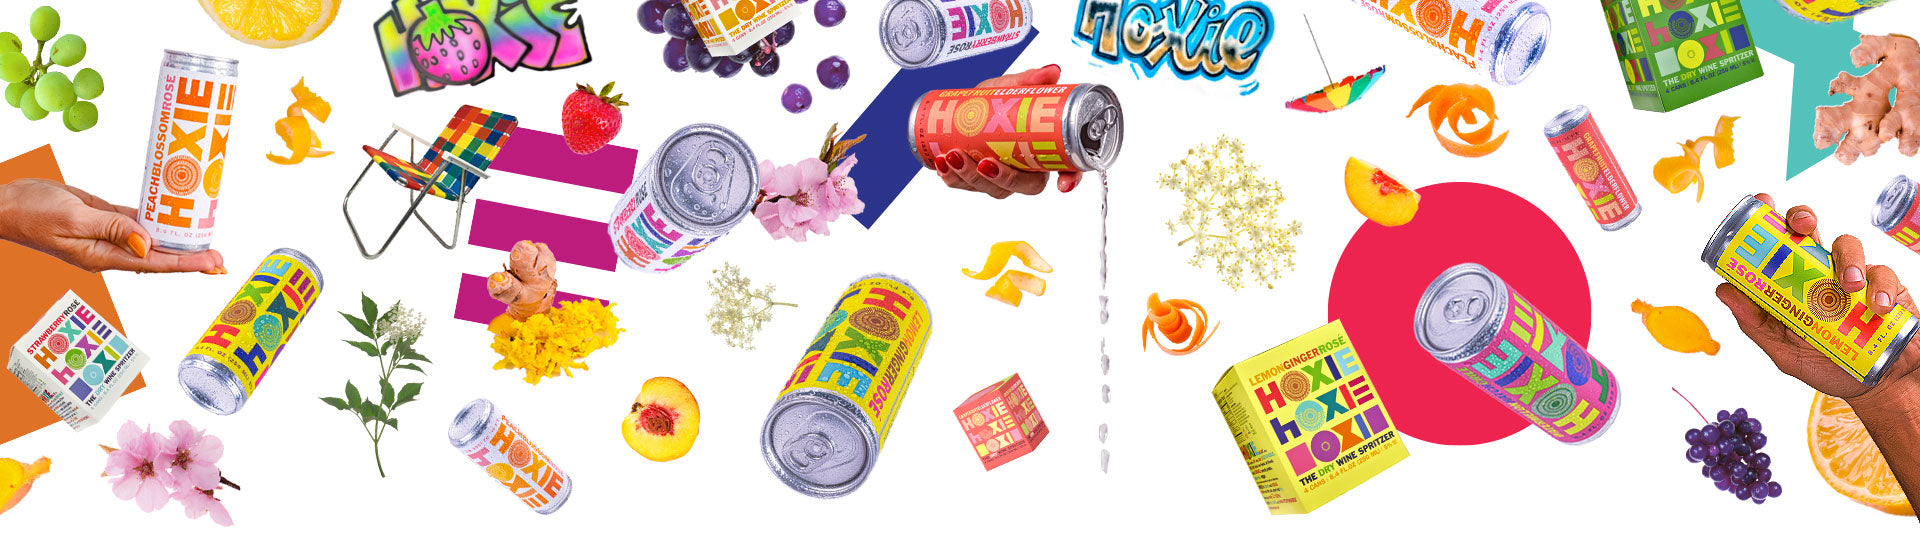 Cans of HOXIE Wine Spritzer in hands with a colorful art background